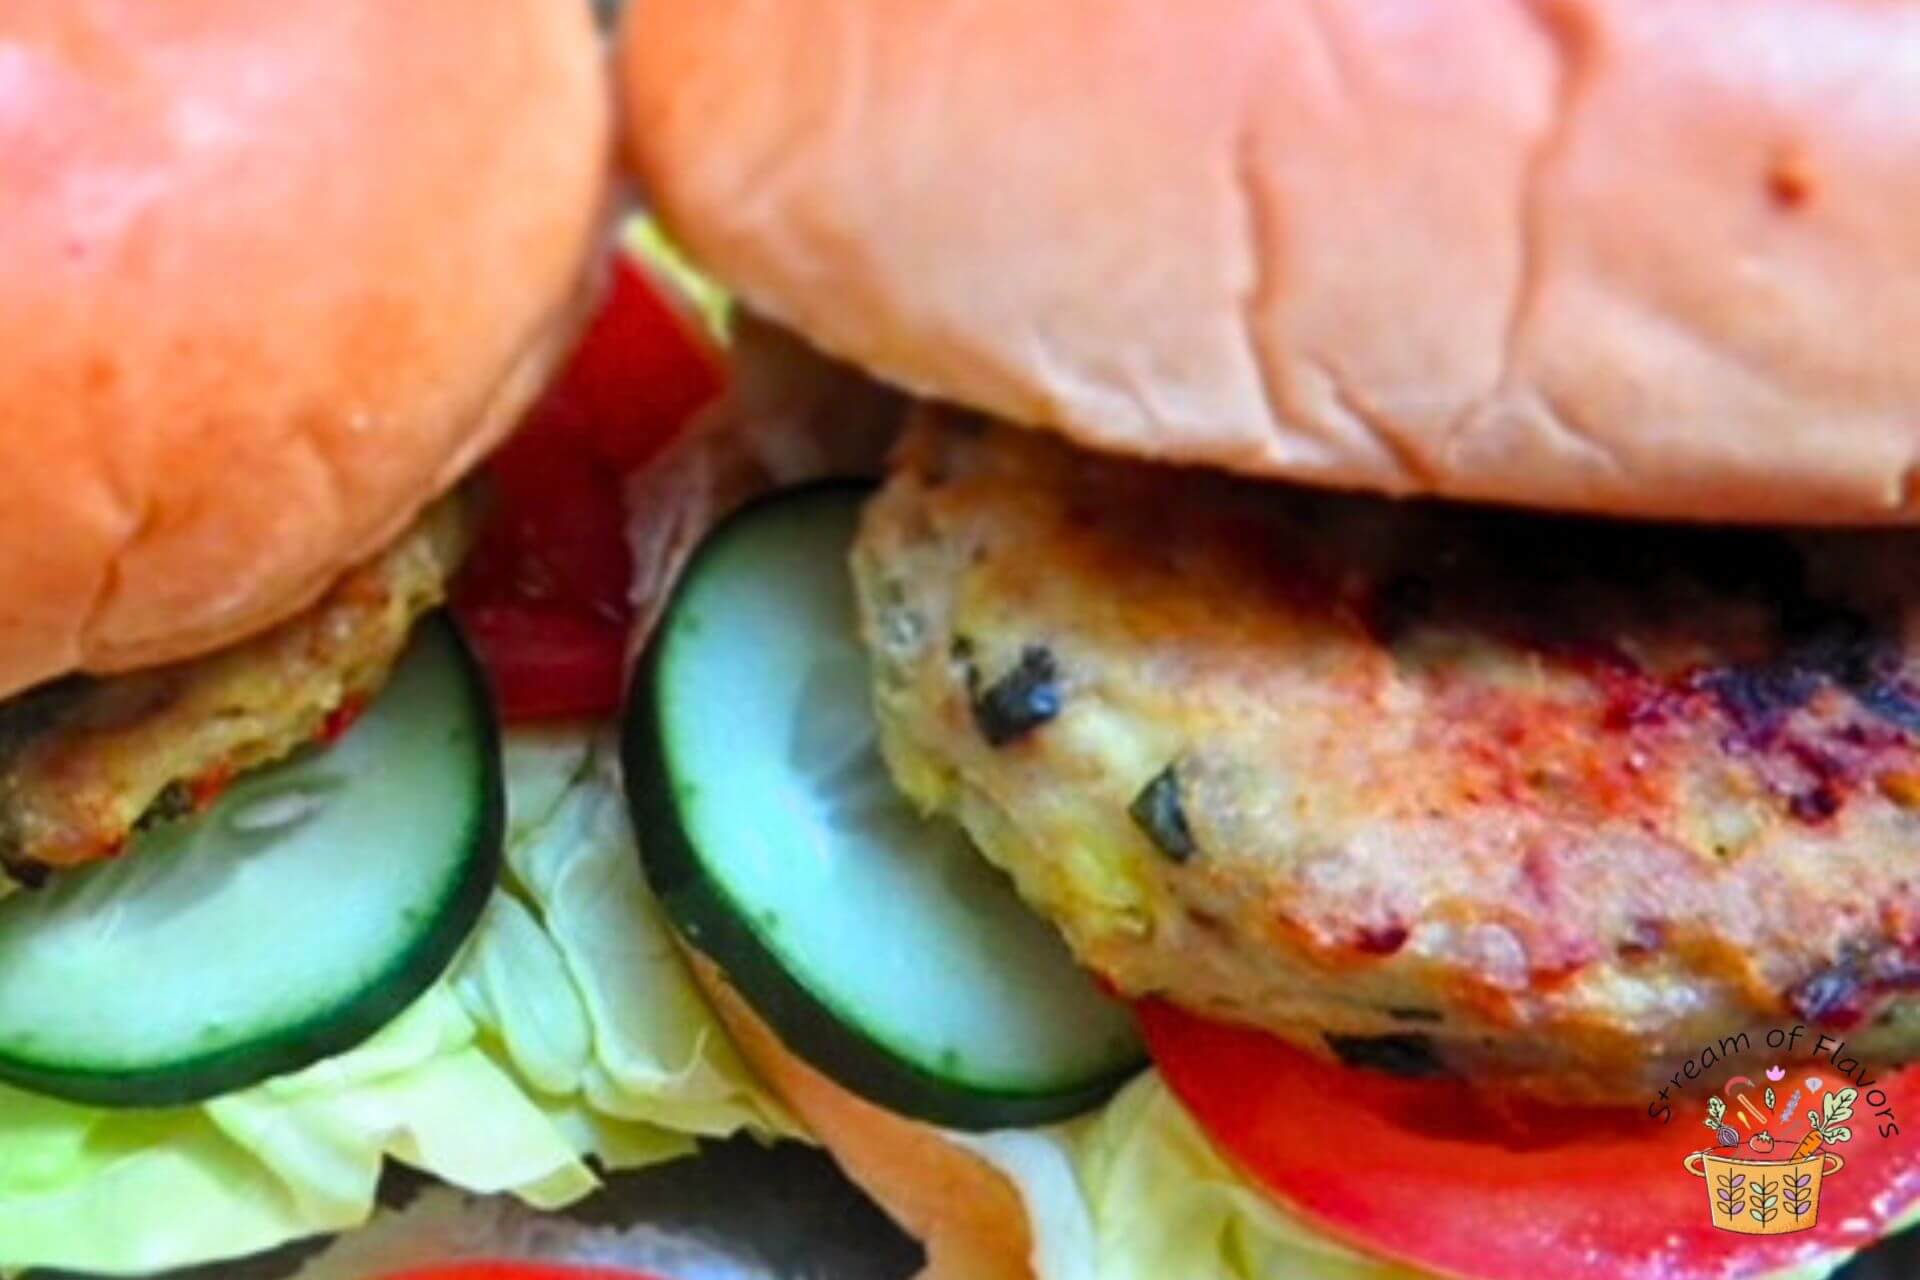 chicken burgers recipe with tomato and cucumber slices